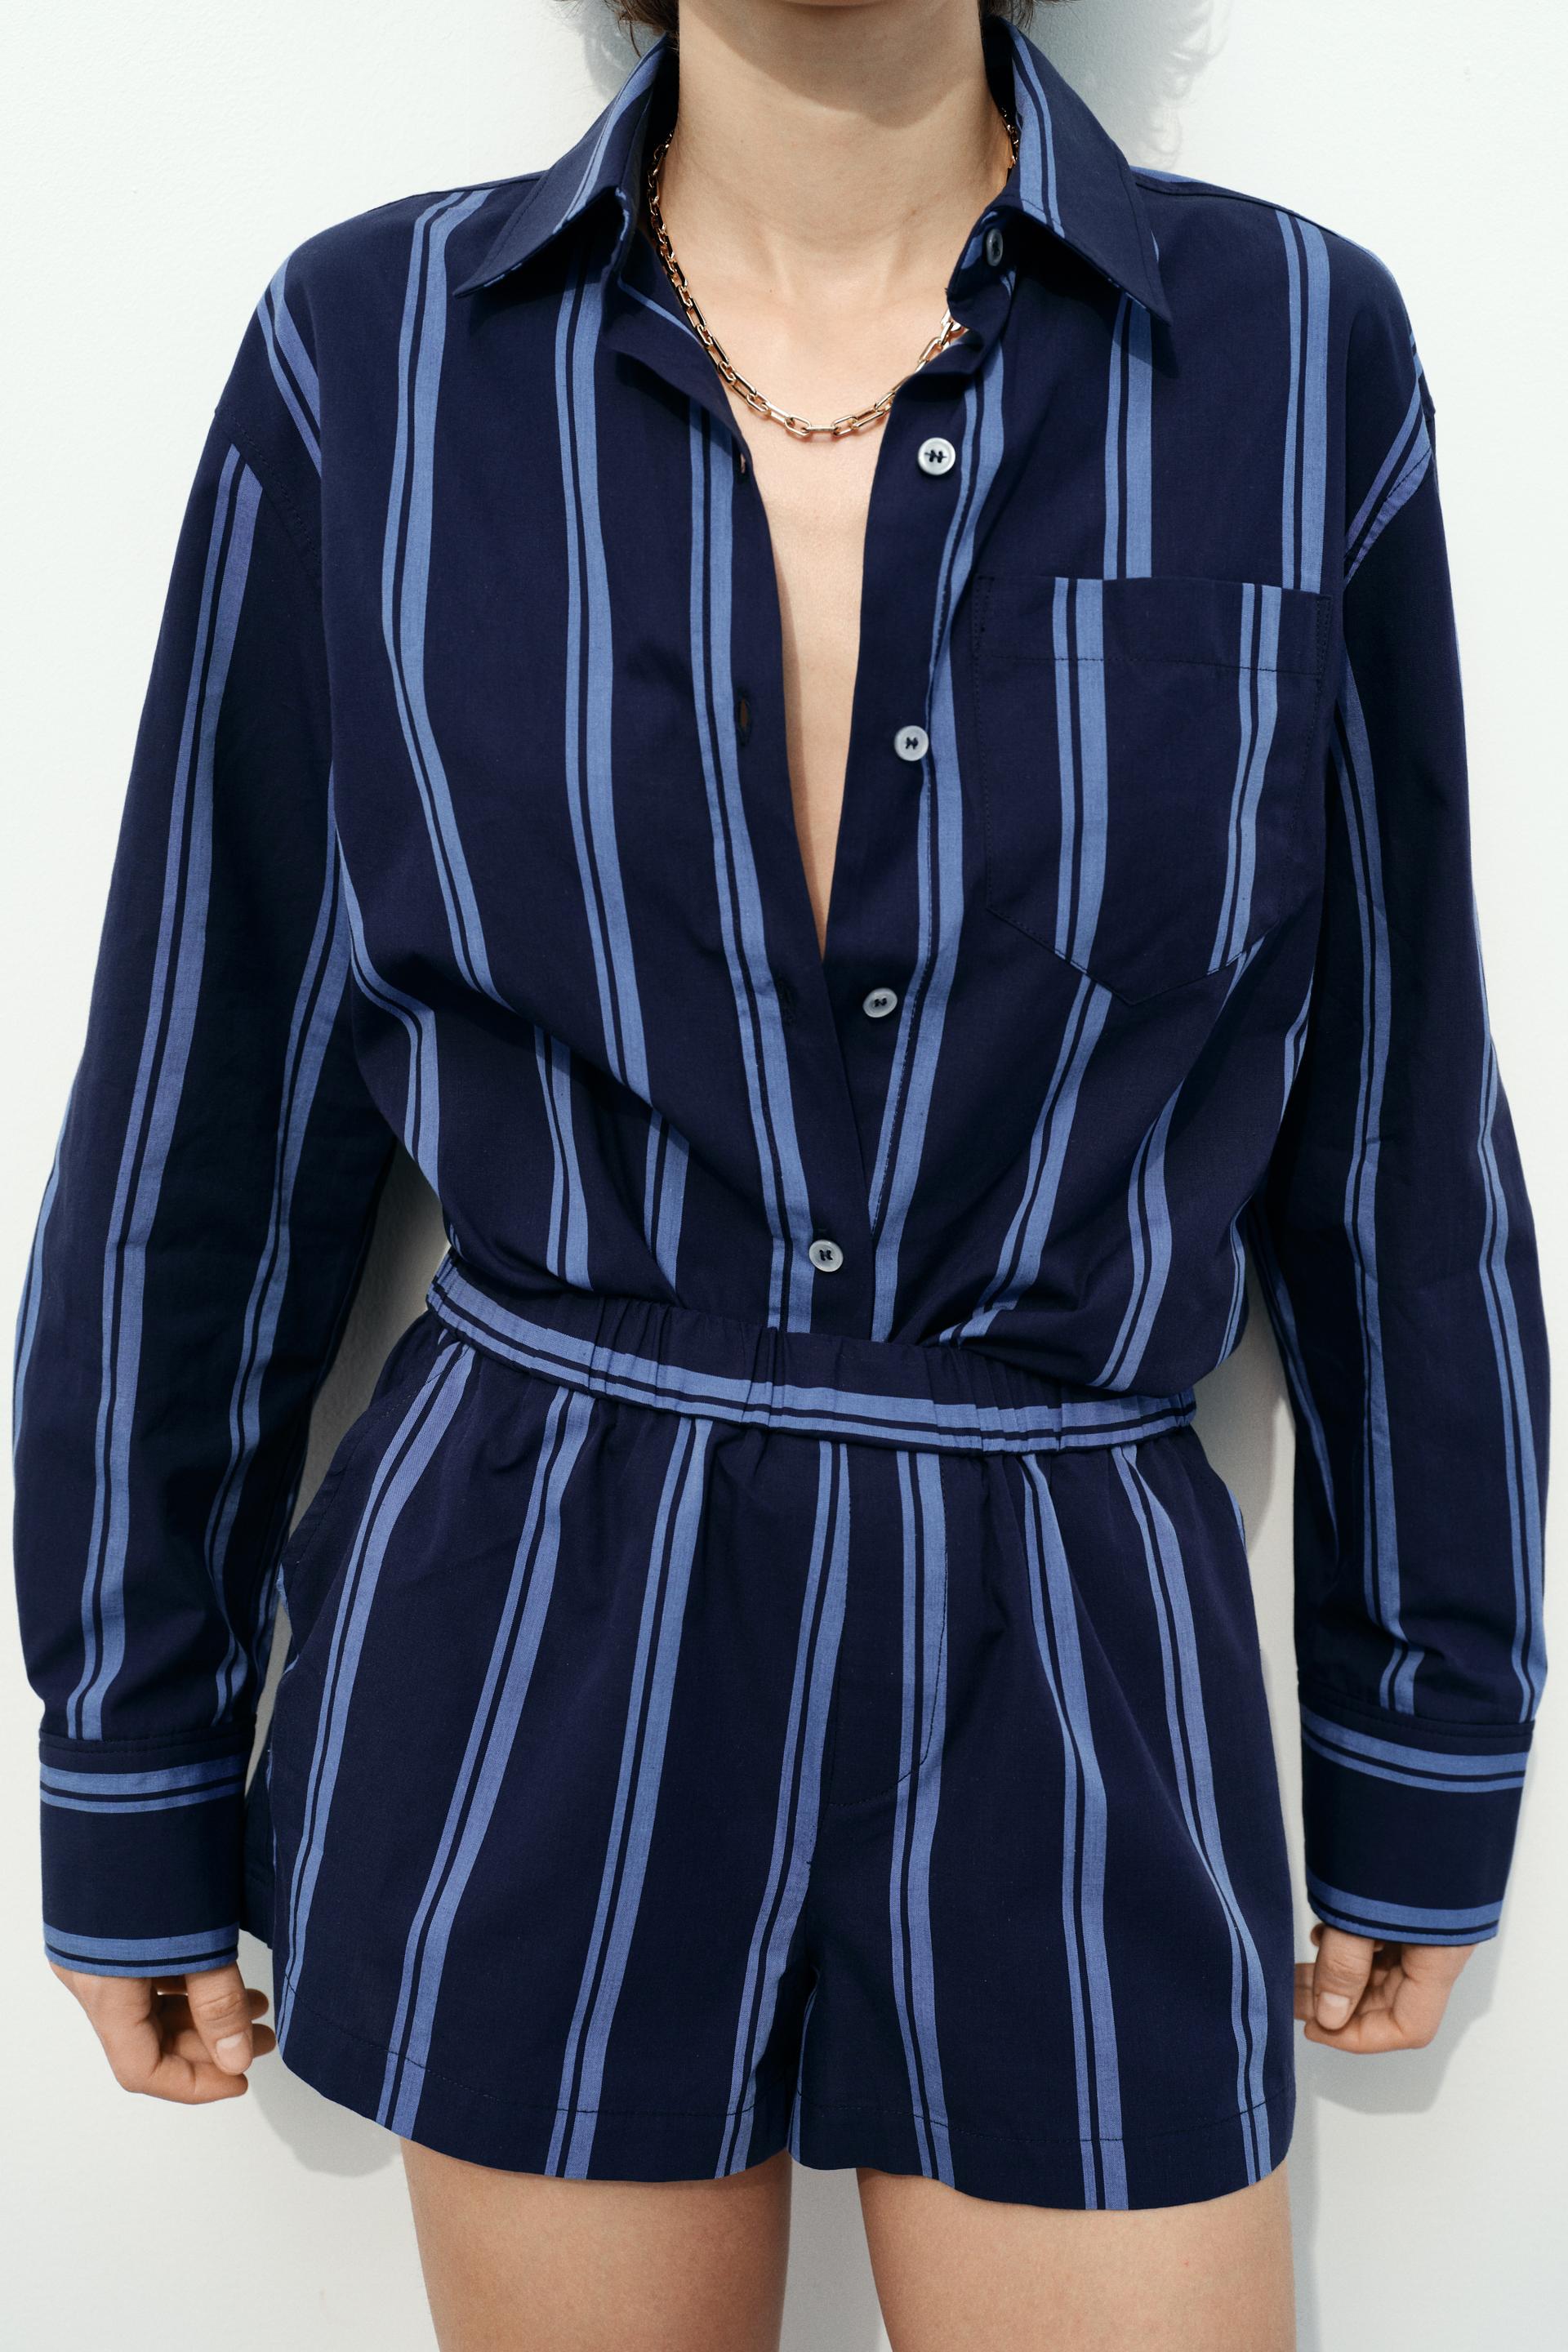 Elan Strapless Cover-up Jumpsuit In Blue Stripe, ModeSens